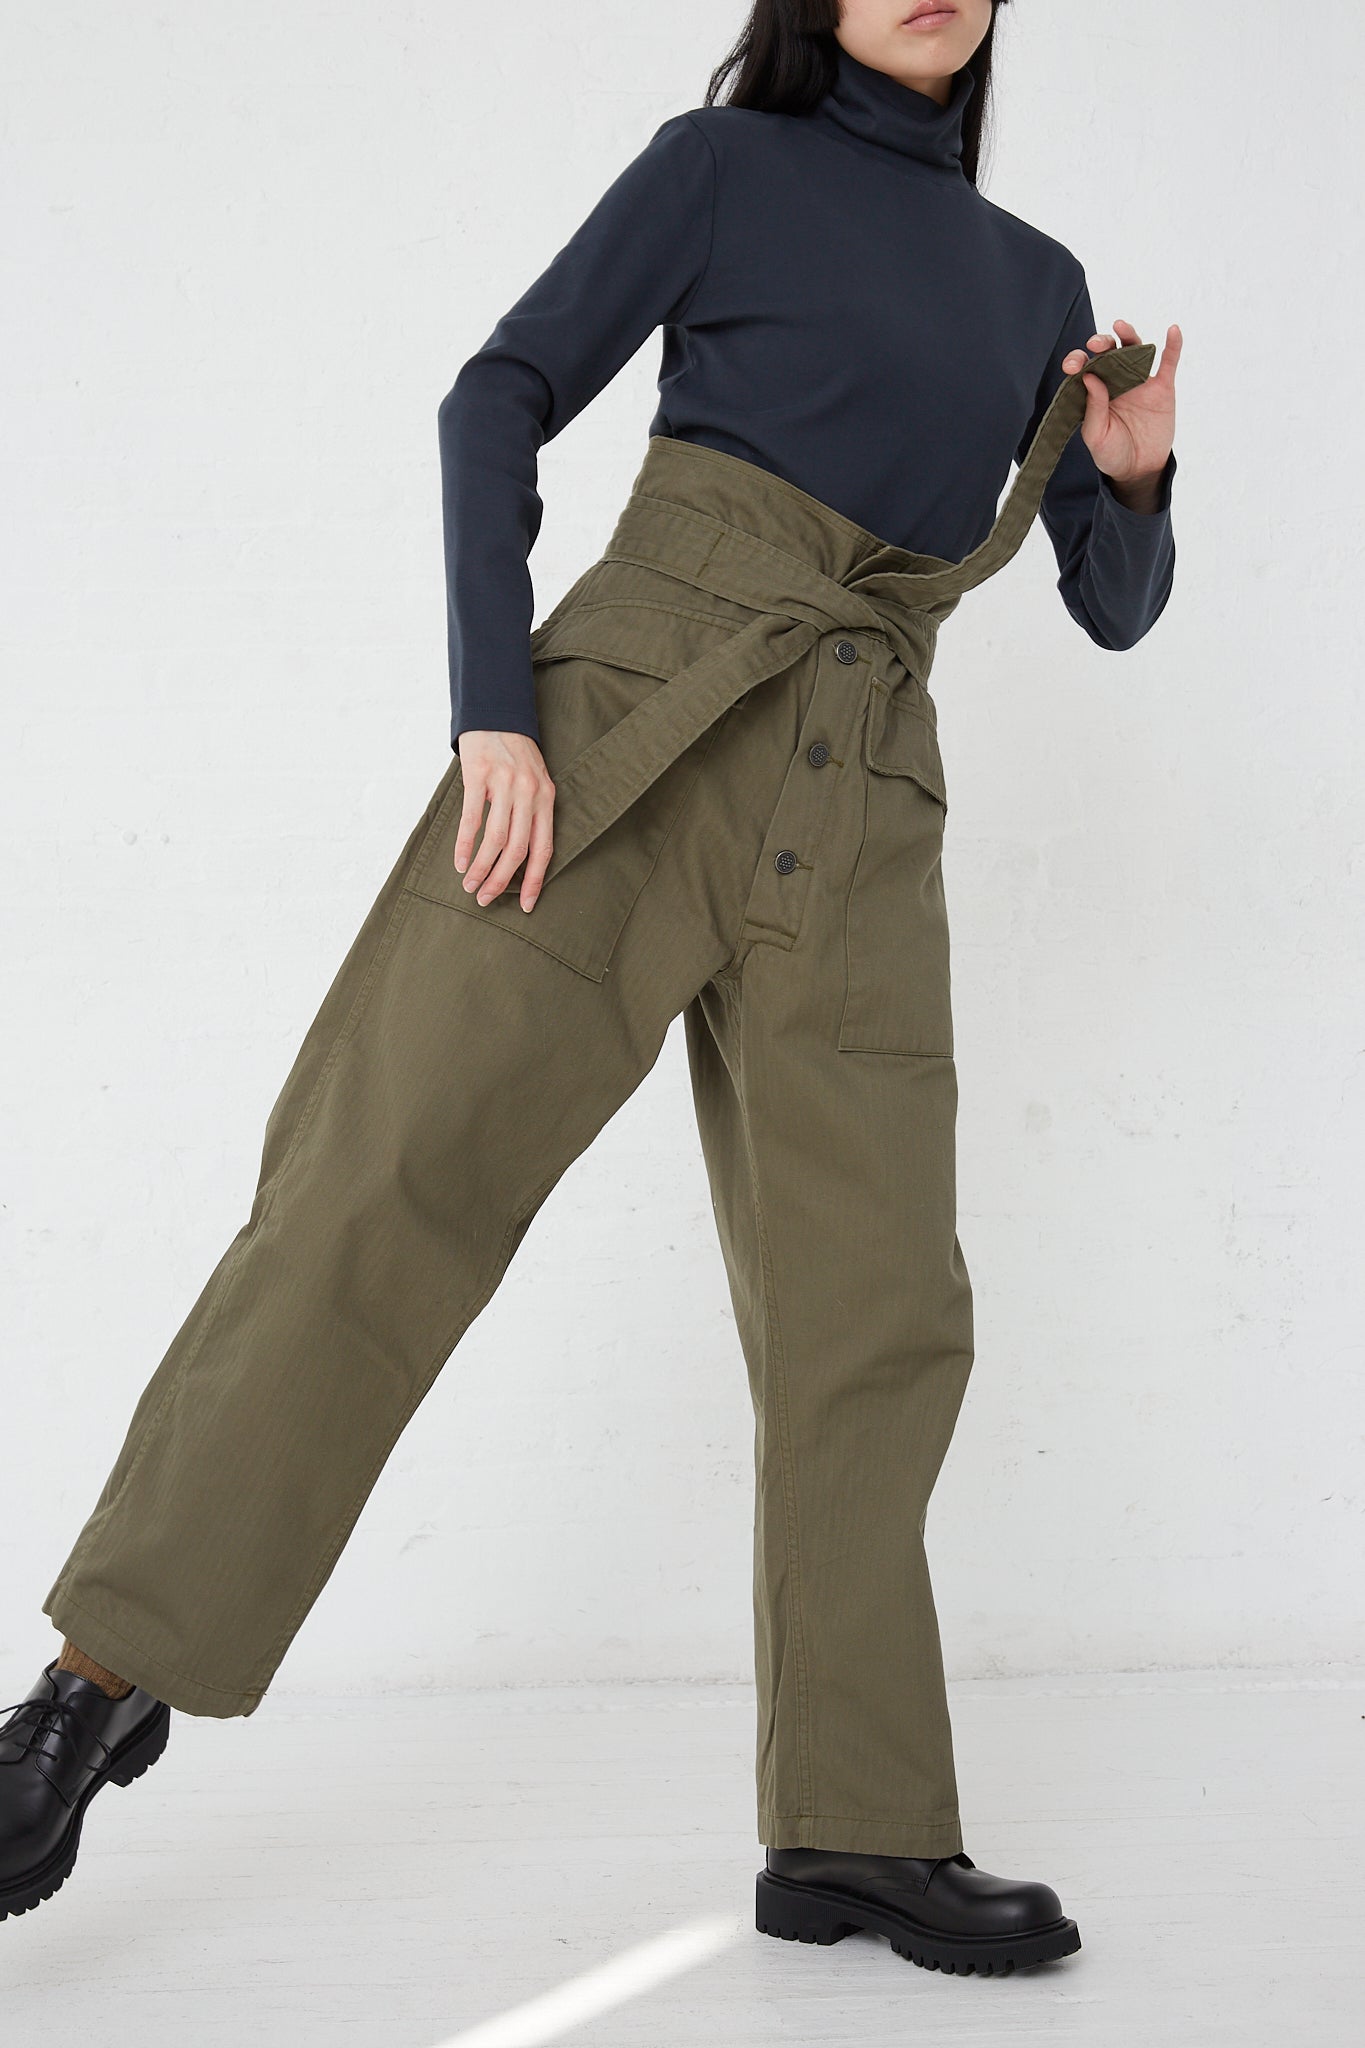 A woman wearing the As Ever Tie Tanker in Olive and a black turtleneck made of 100% cotton.